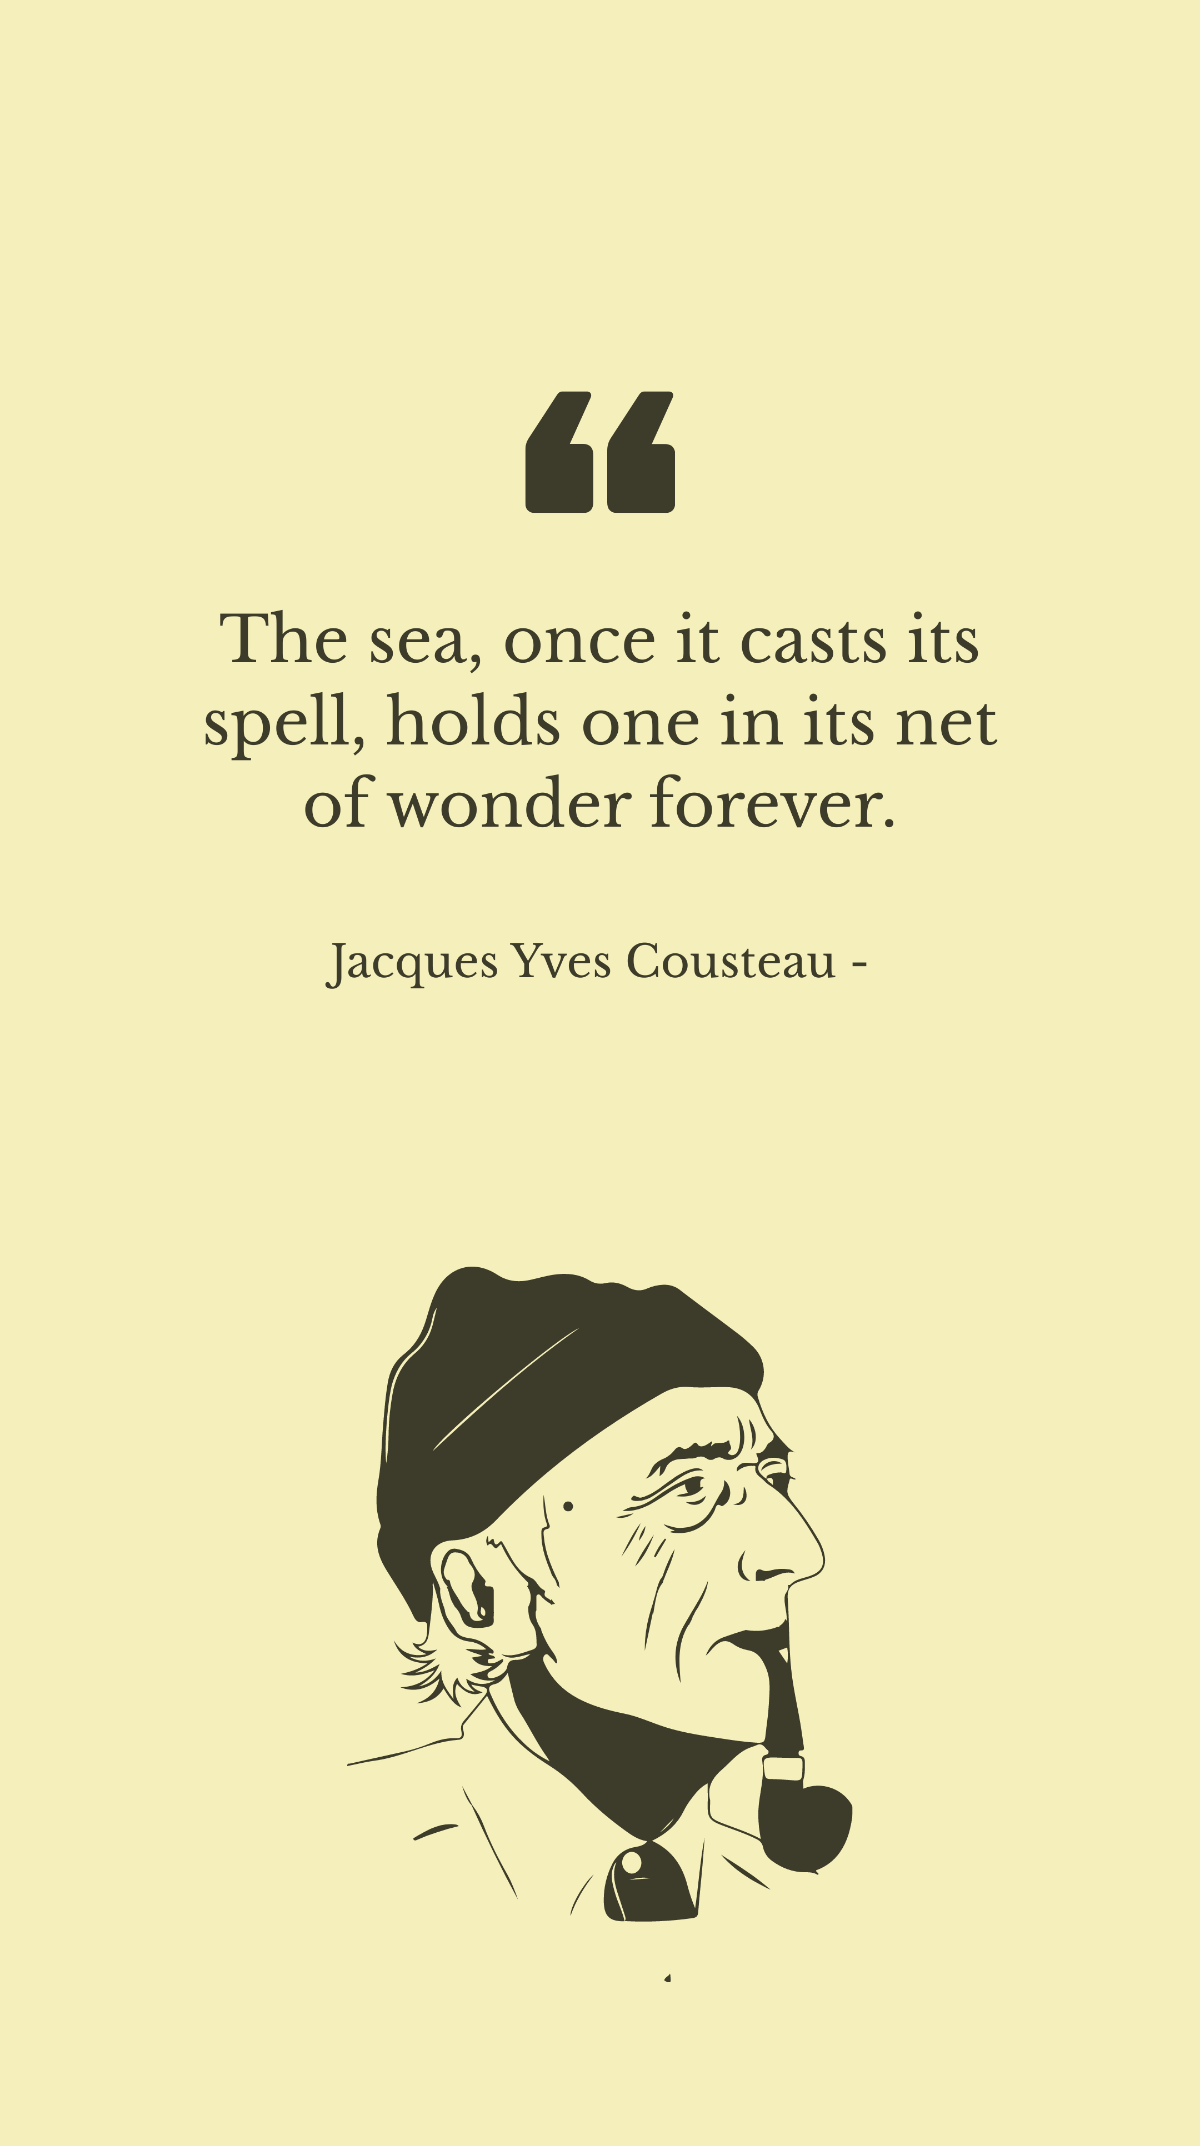 Free Jacques Yves Cousteau - The sea, once it casts its spell, holds one in its net of wonder forever. Template